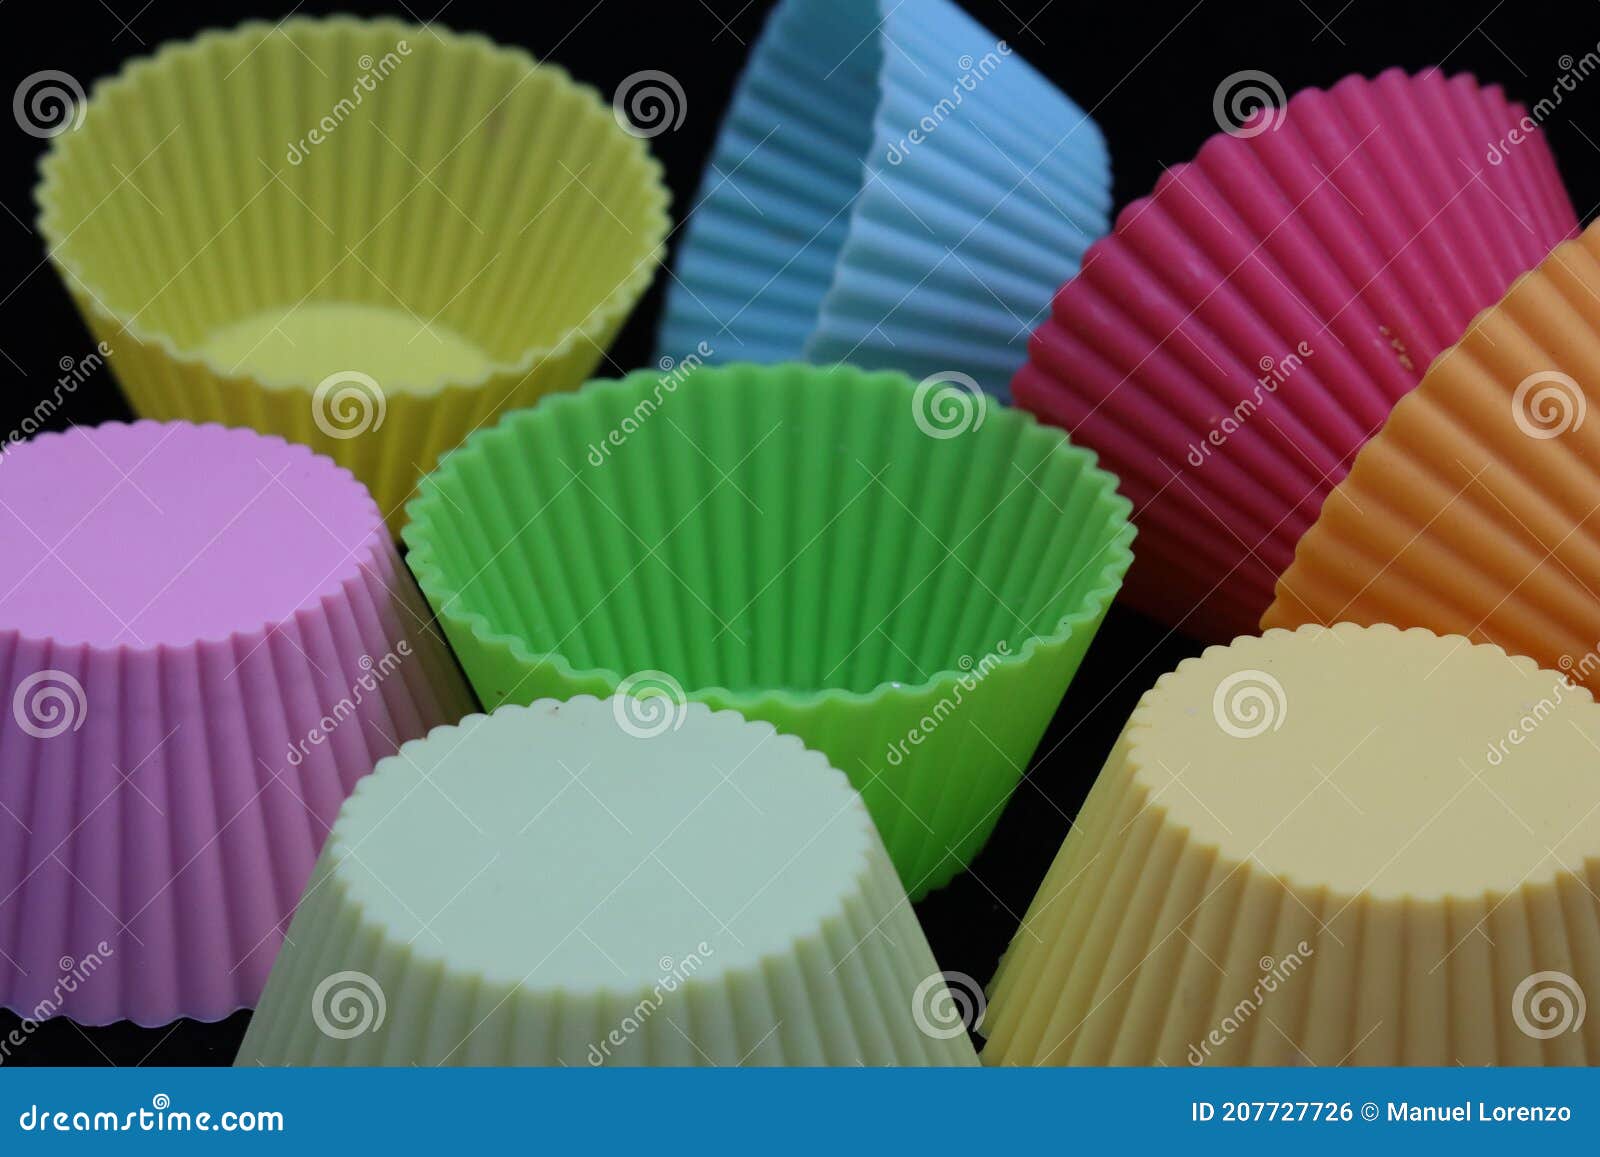 beautiful colored silicone molds to make delicious muffins with great flavor